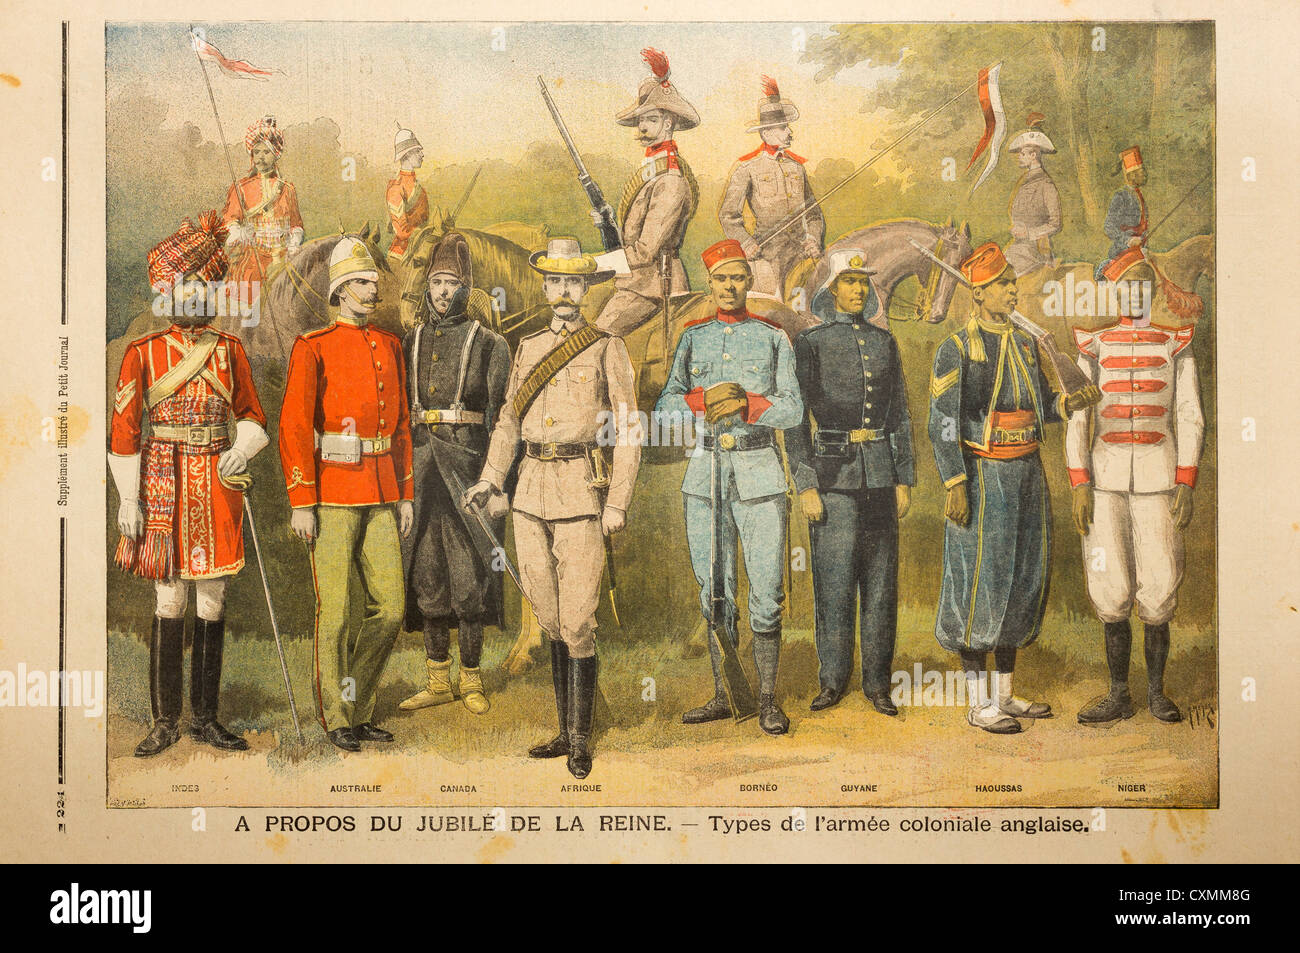 Le Petit Journal 1897 illustration of British colonial army uniforms Stock Photo